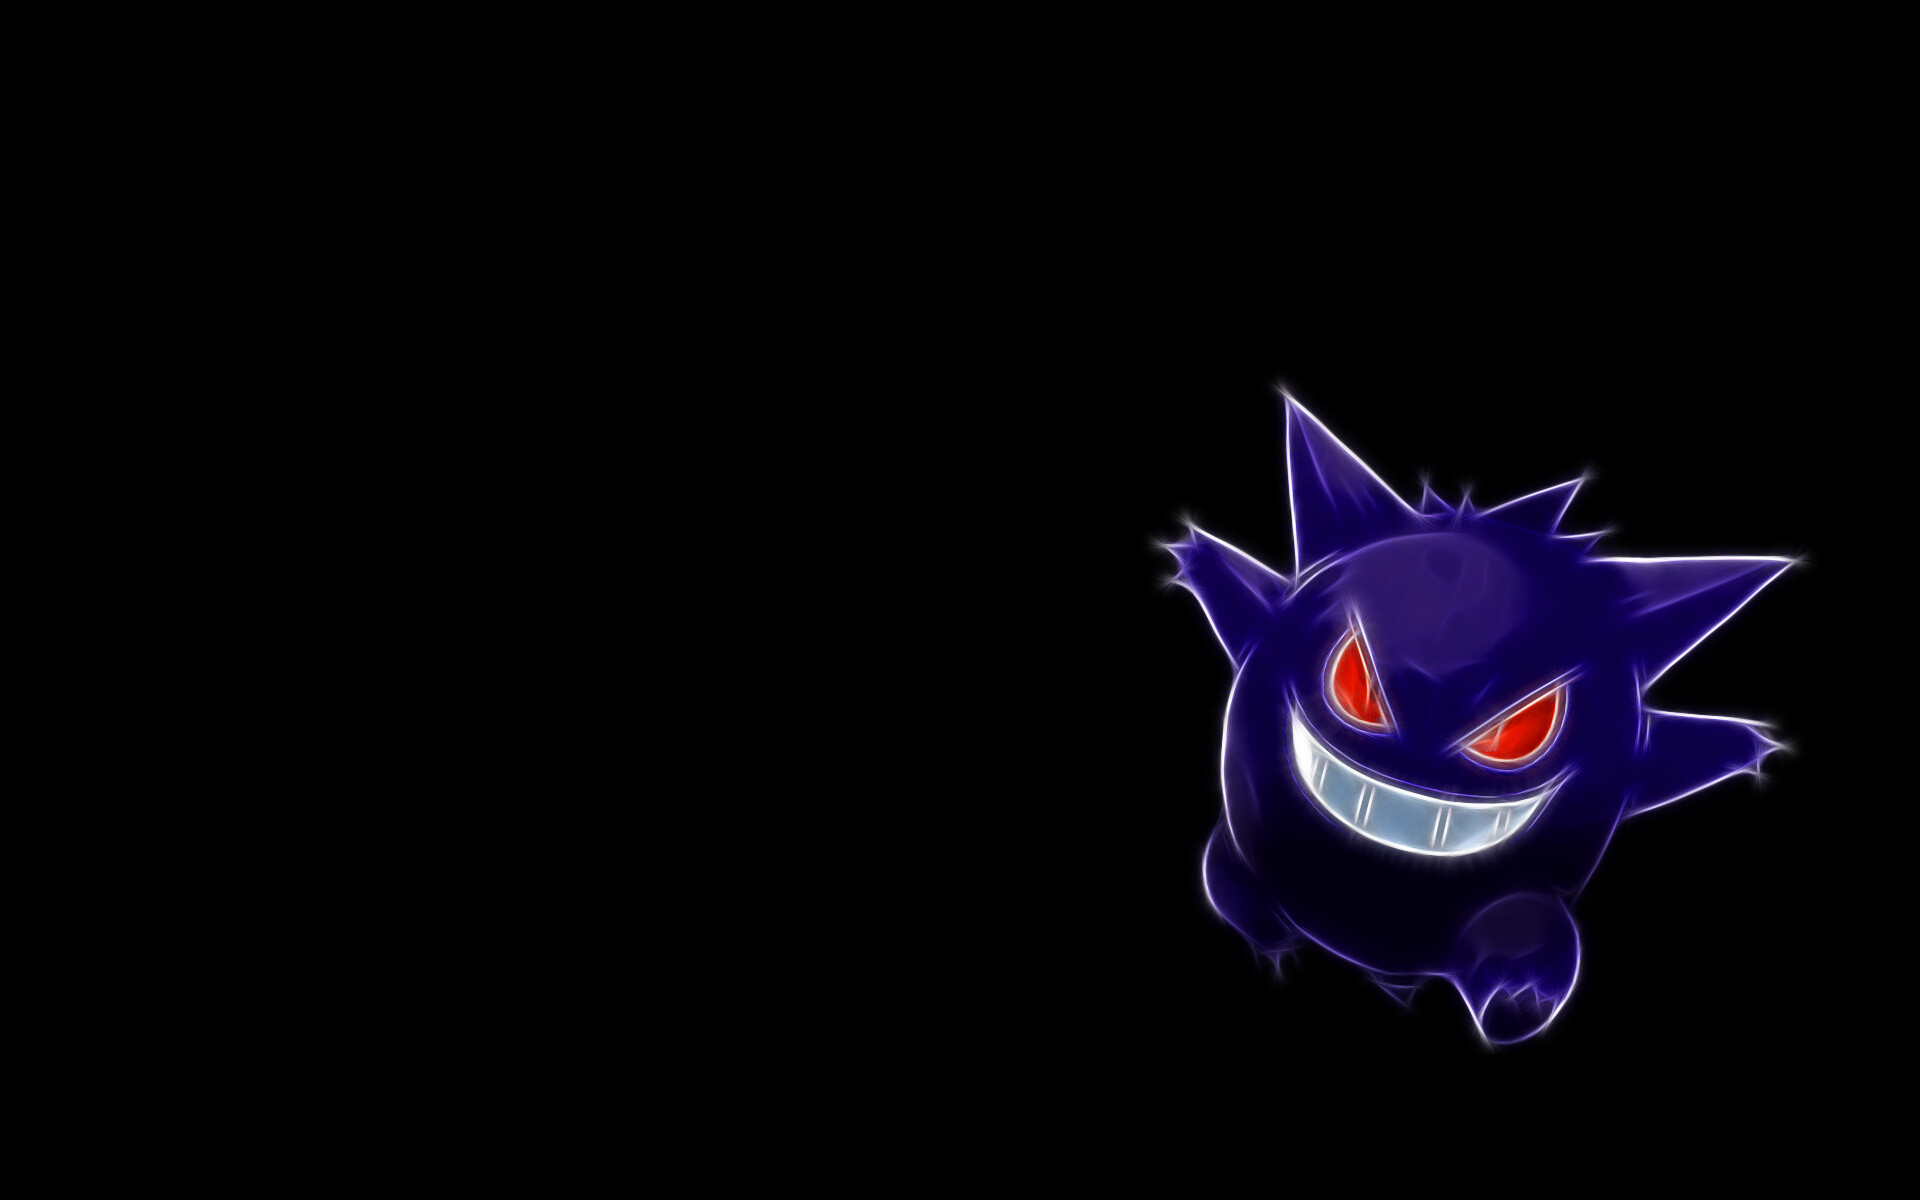 Gengar: The ability to absorb the warmth, Night Shade, A signature move, Playing practical jokes and casting curses. 1920x1200 HD Wallpaper.